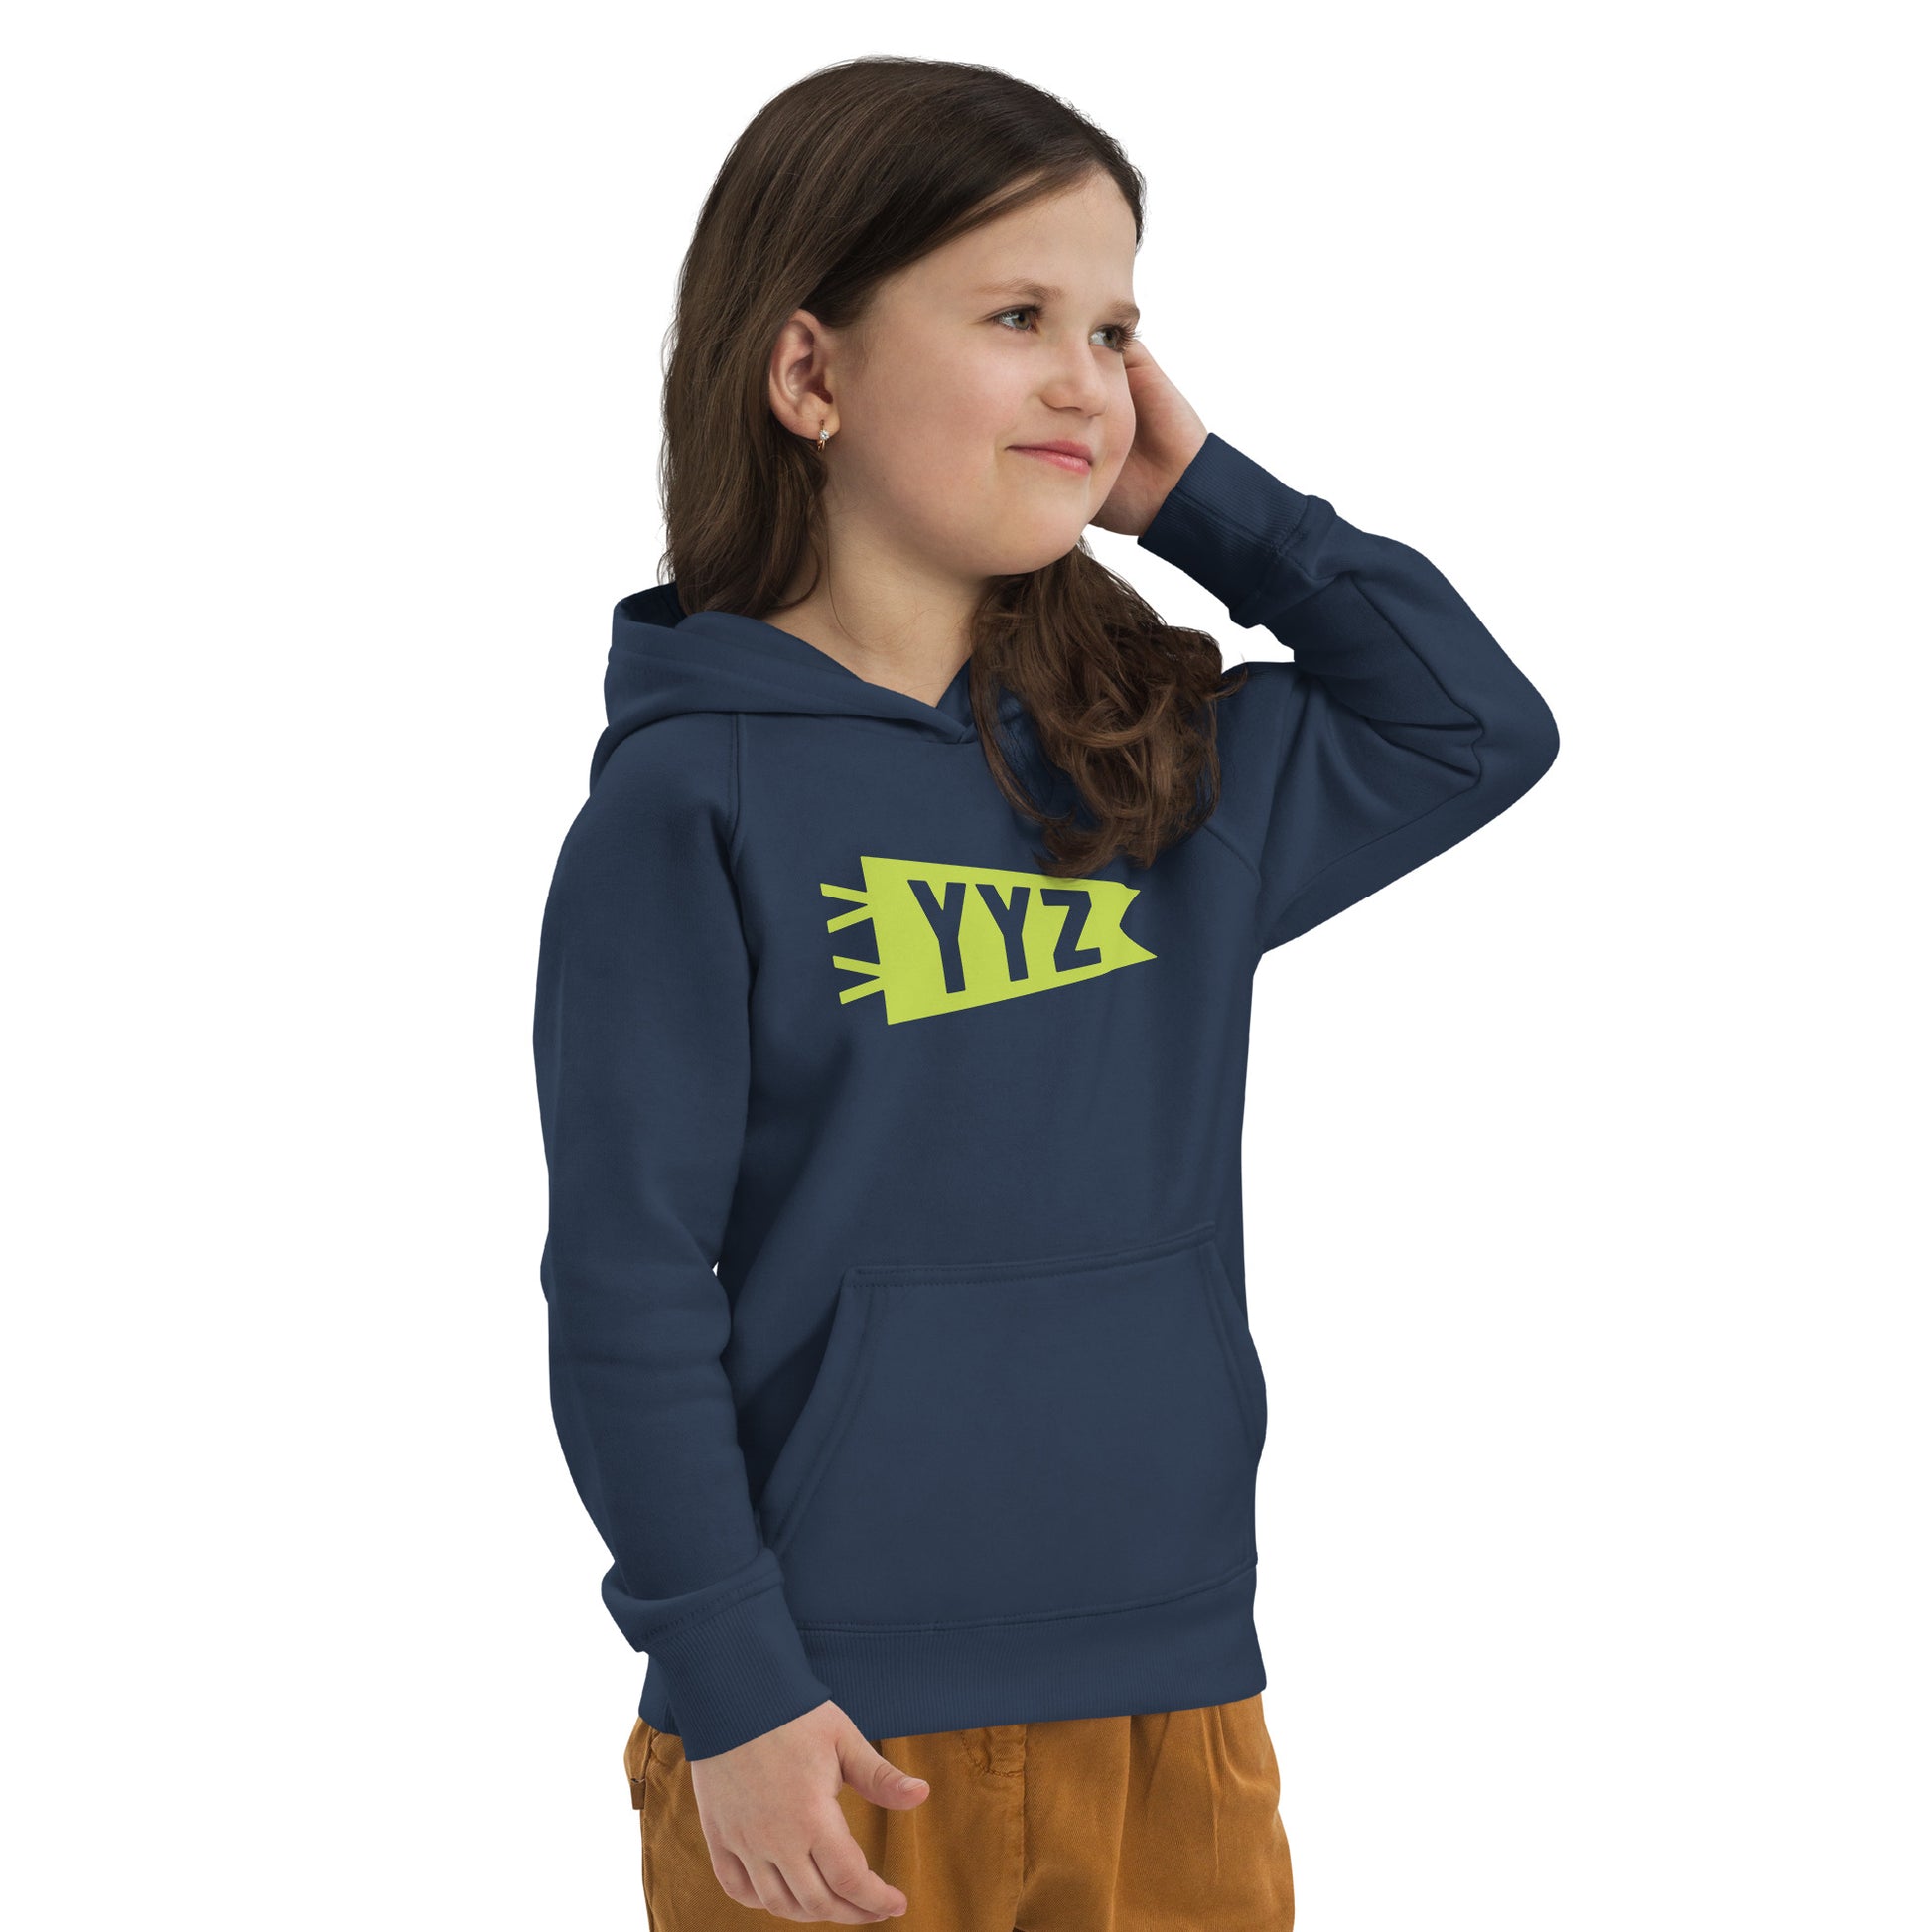 Kid's Sustainable Hoodie - Green Graphic • YYZ Toronto • YHM Designs - Image 06